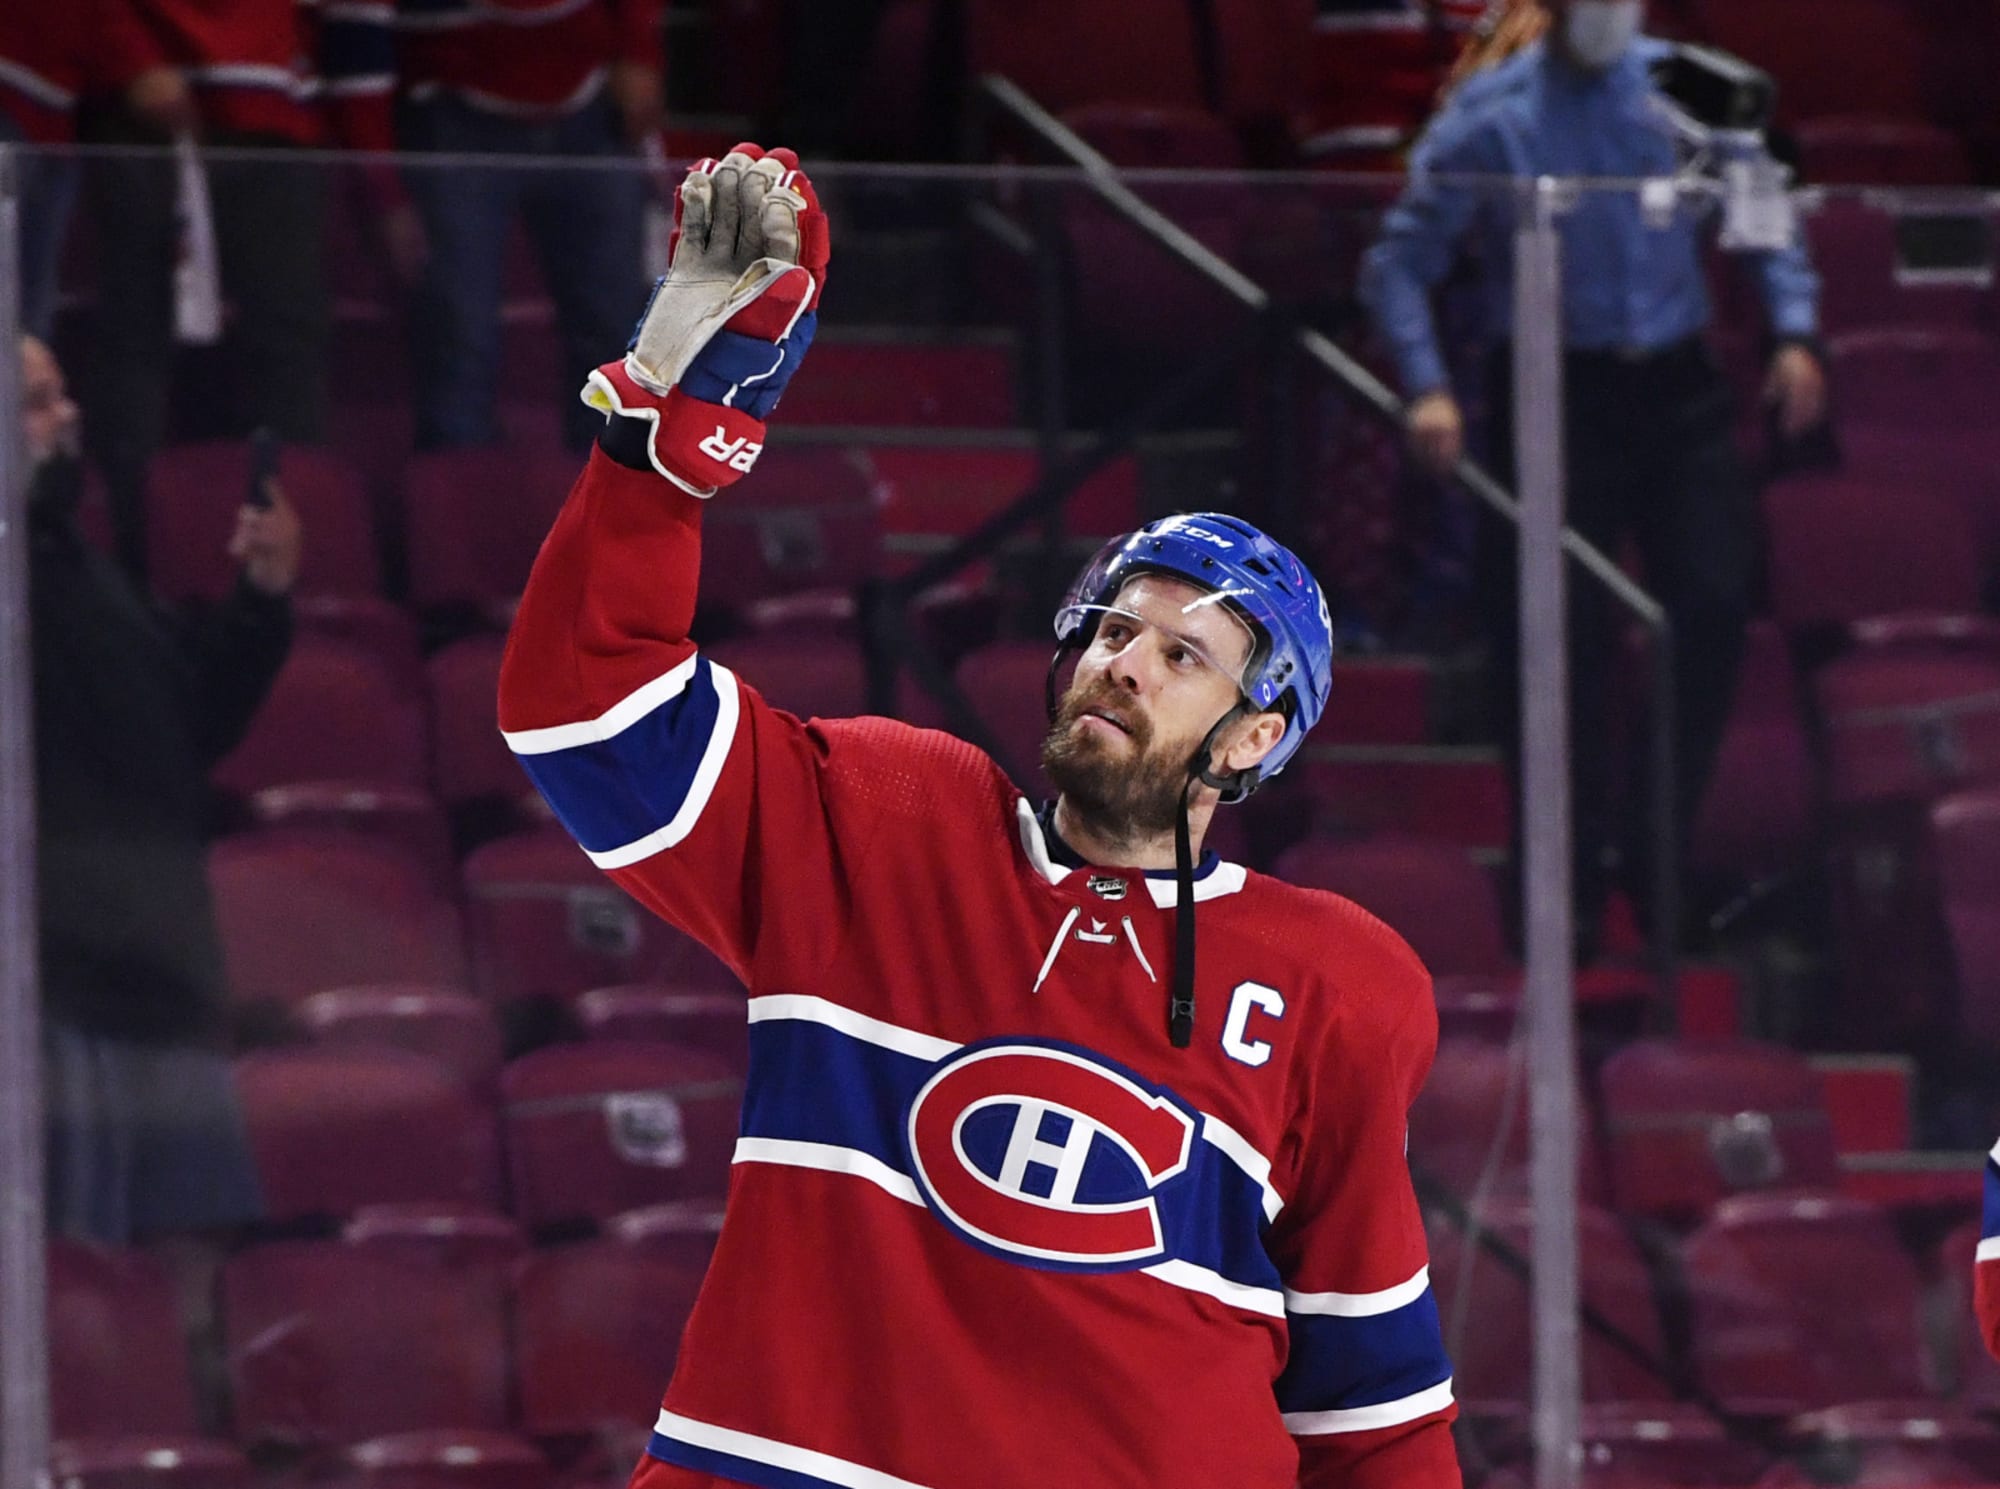 Host: Shea Weber “doesn't give a damn” about the Canadiens